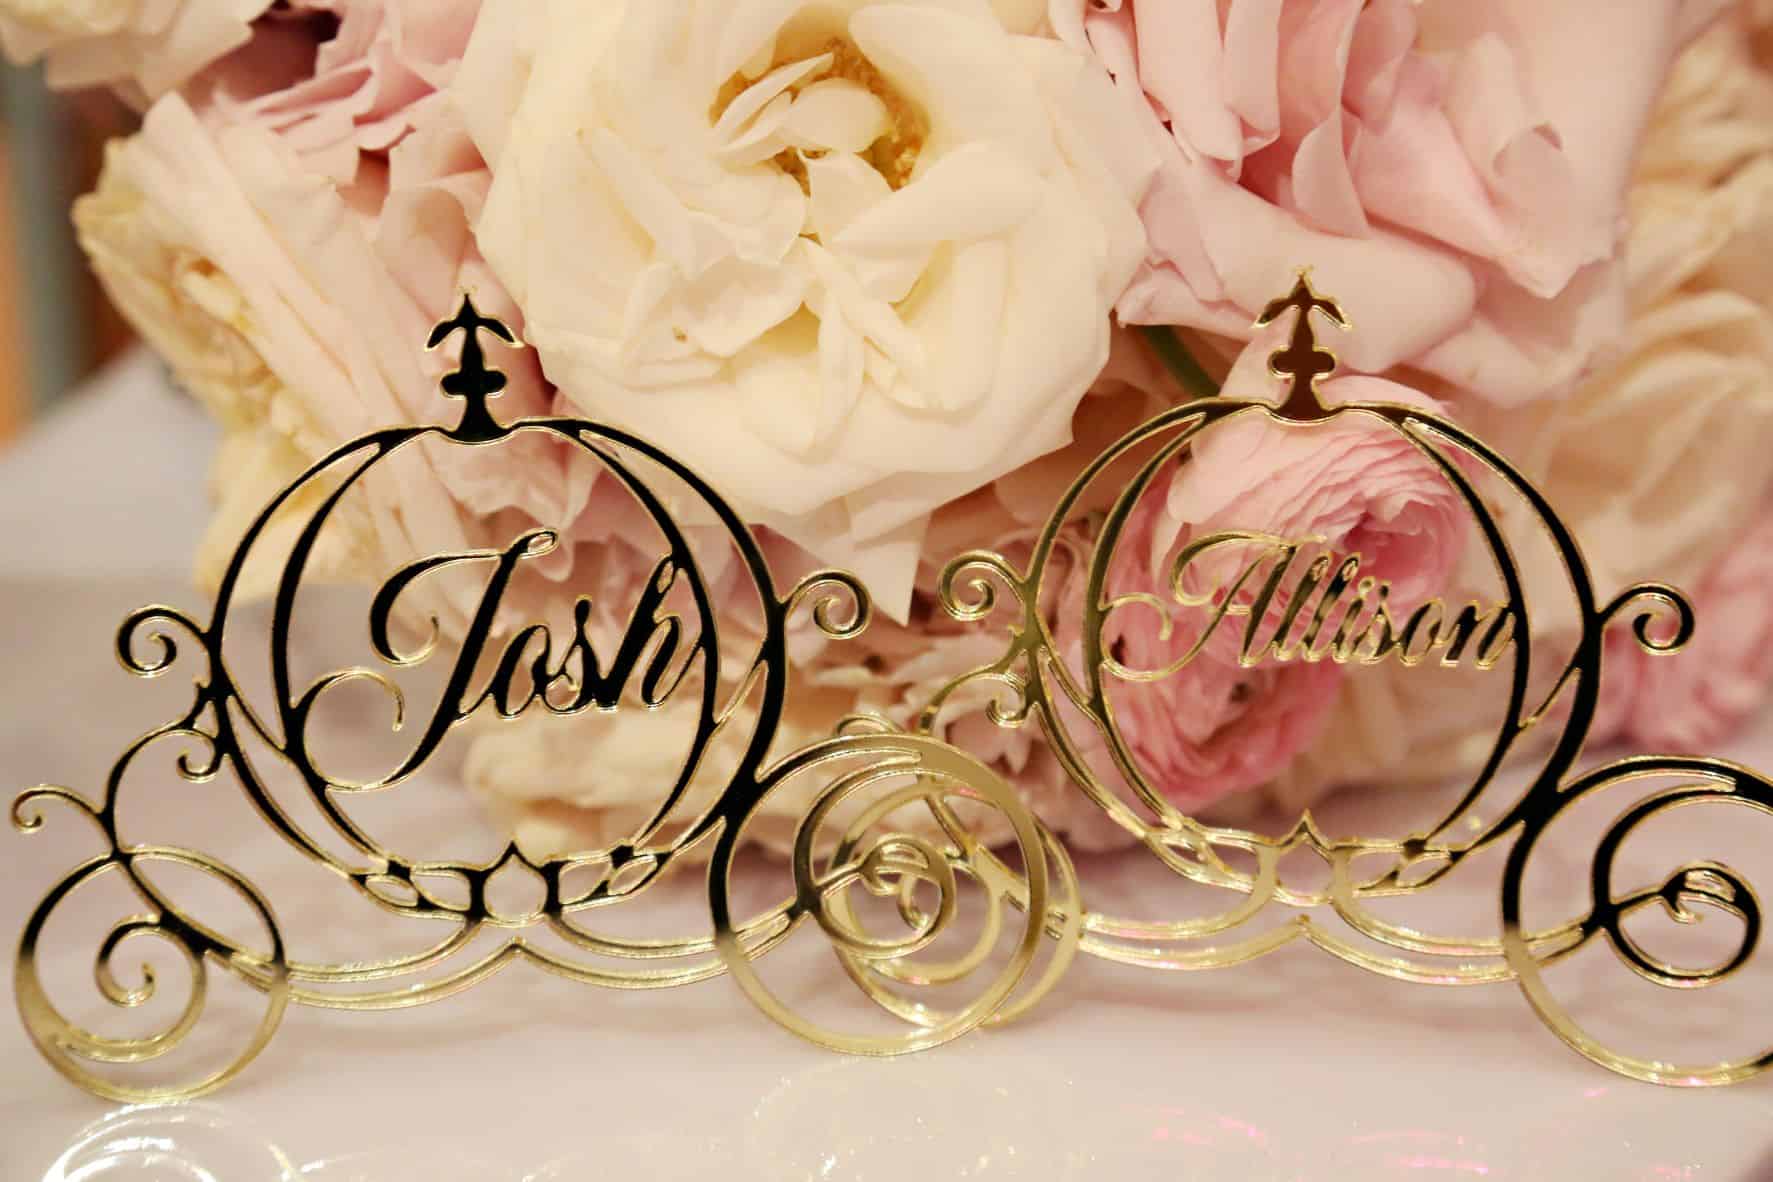 Disney Vow Renewal - Just Marry Weddings - Caldwell Photography - Wedding Details